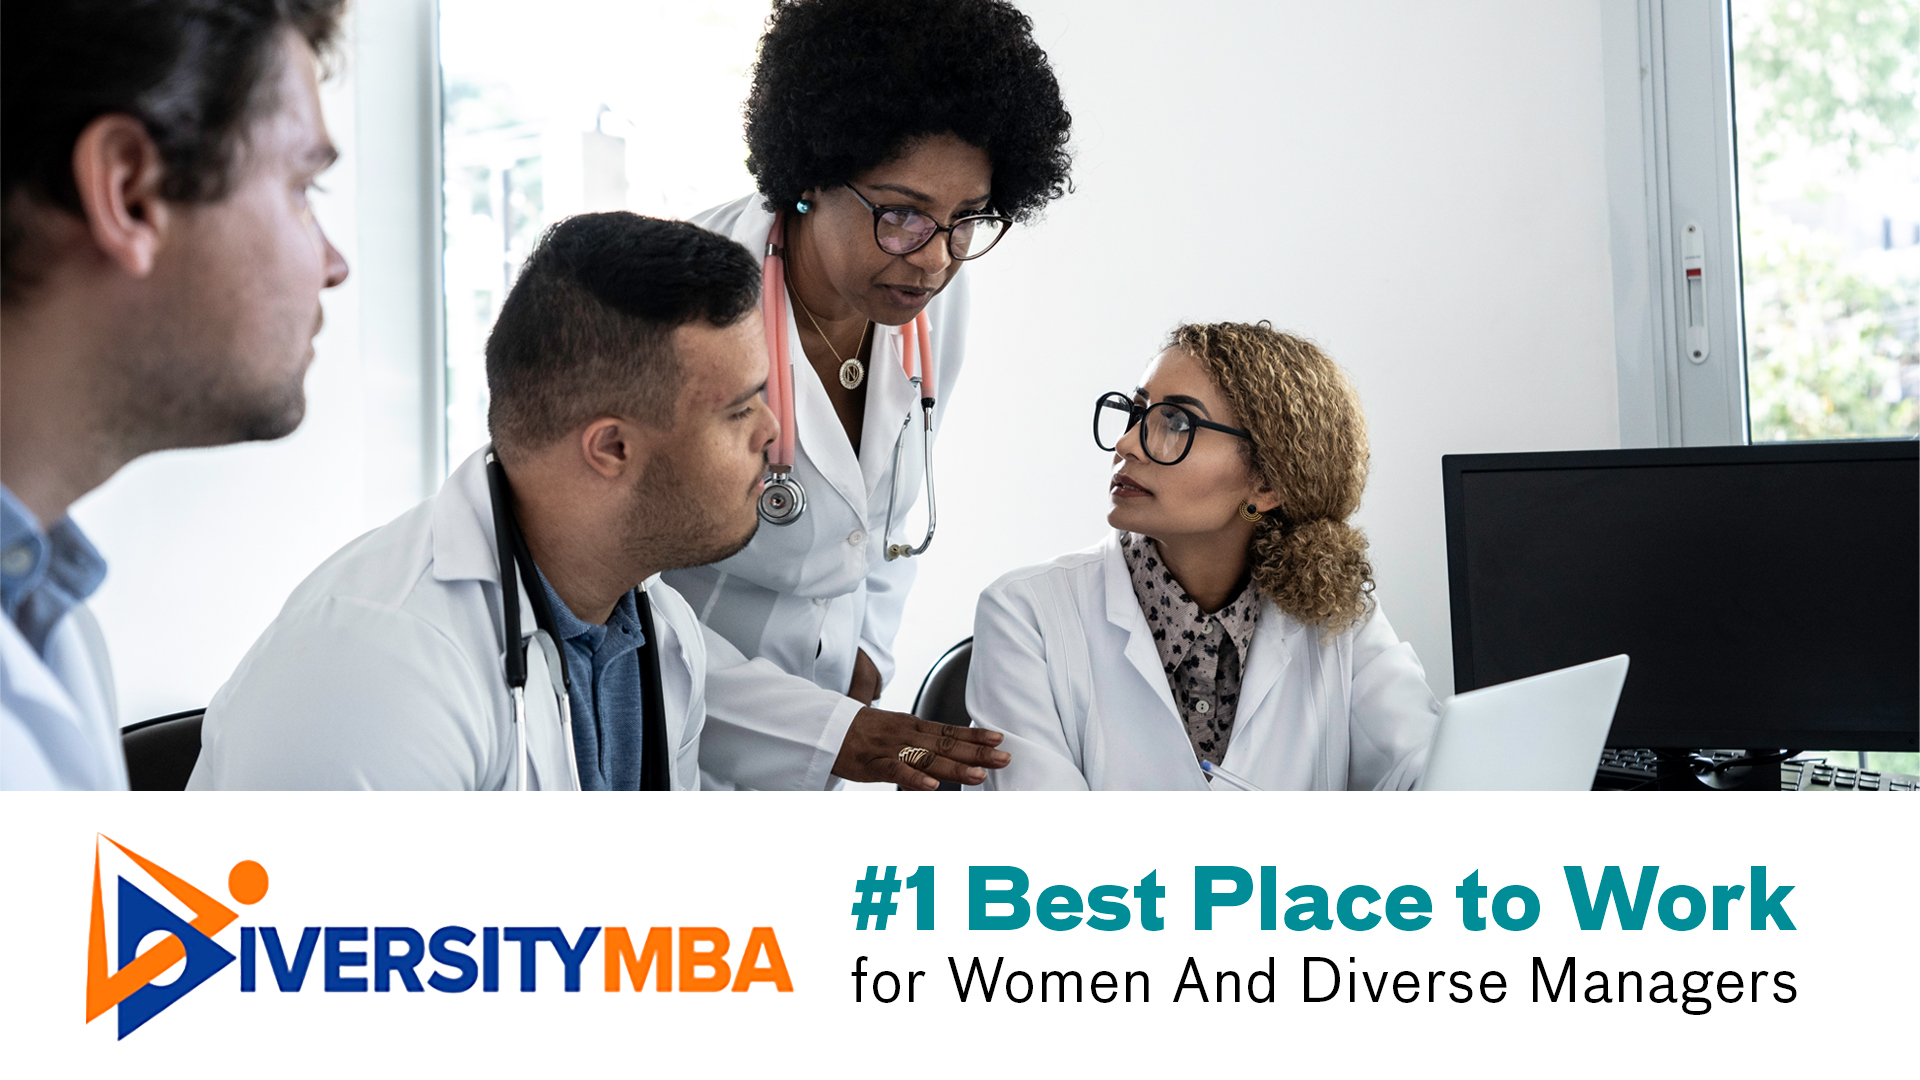 Atrium Health is “Best Place to Work” in U.S. for Women and Diverse Managers 